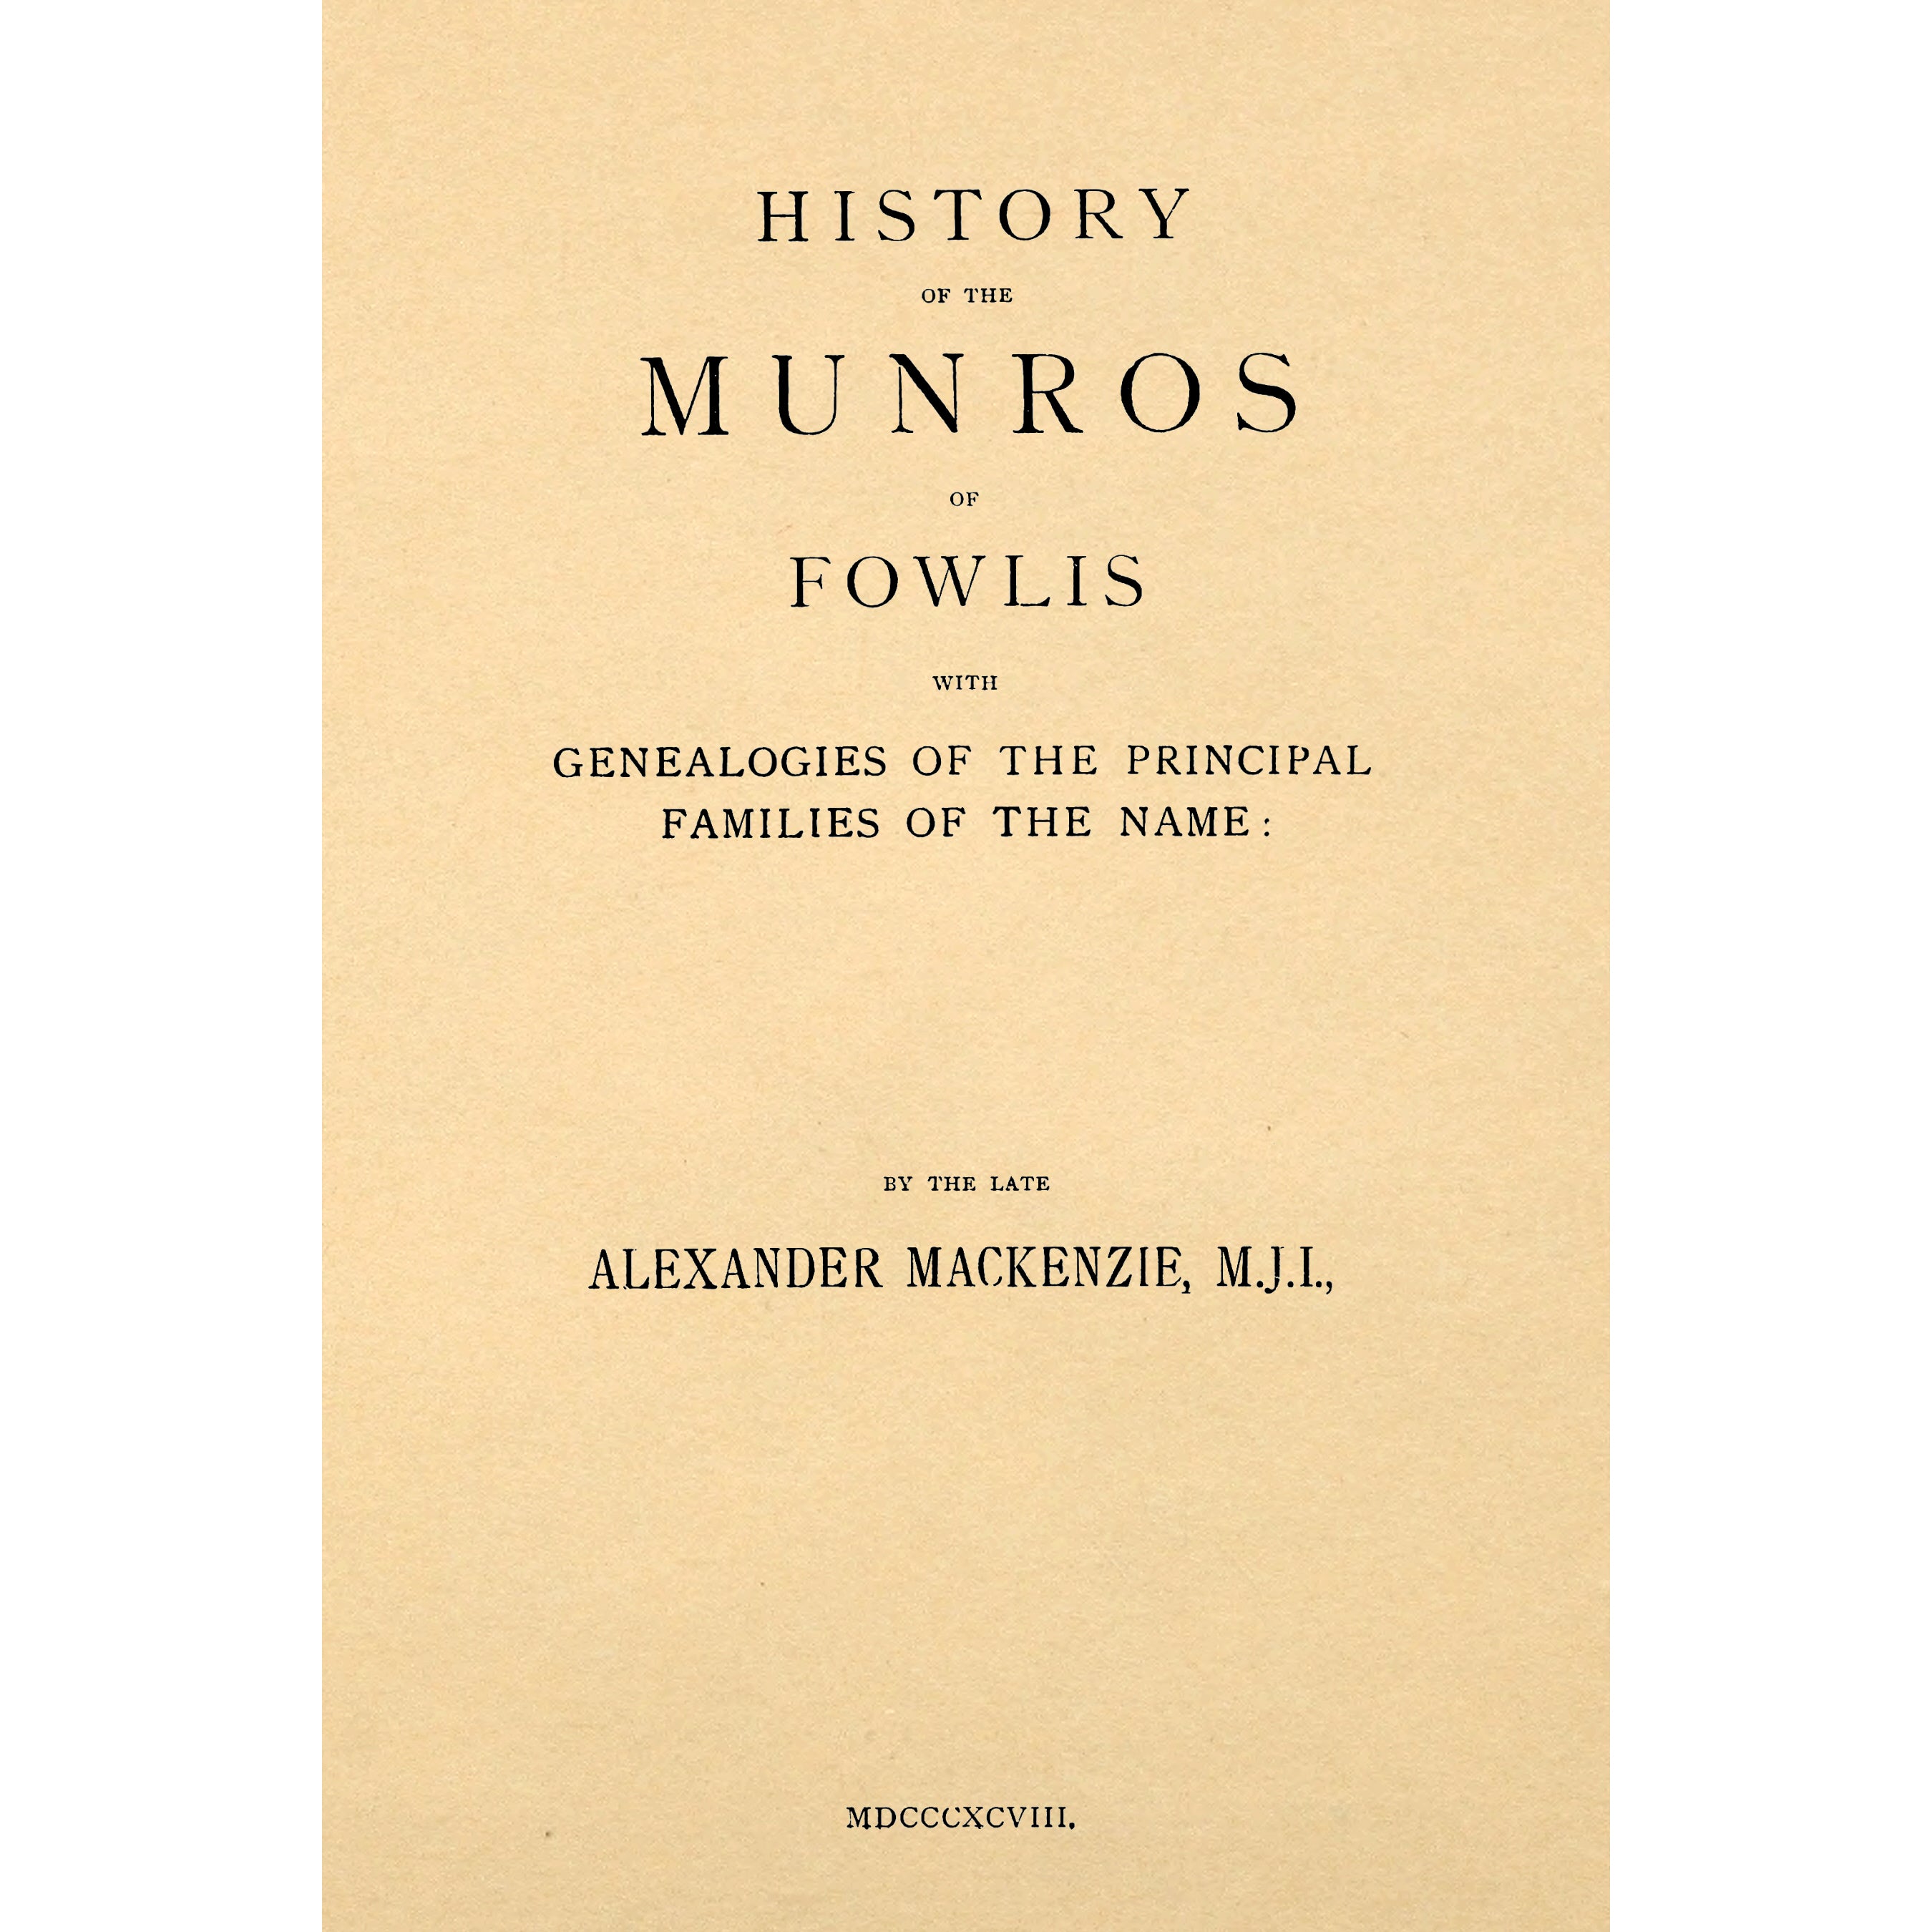 History of the Munros of Fowlis with genealogies of the principal families of the name